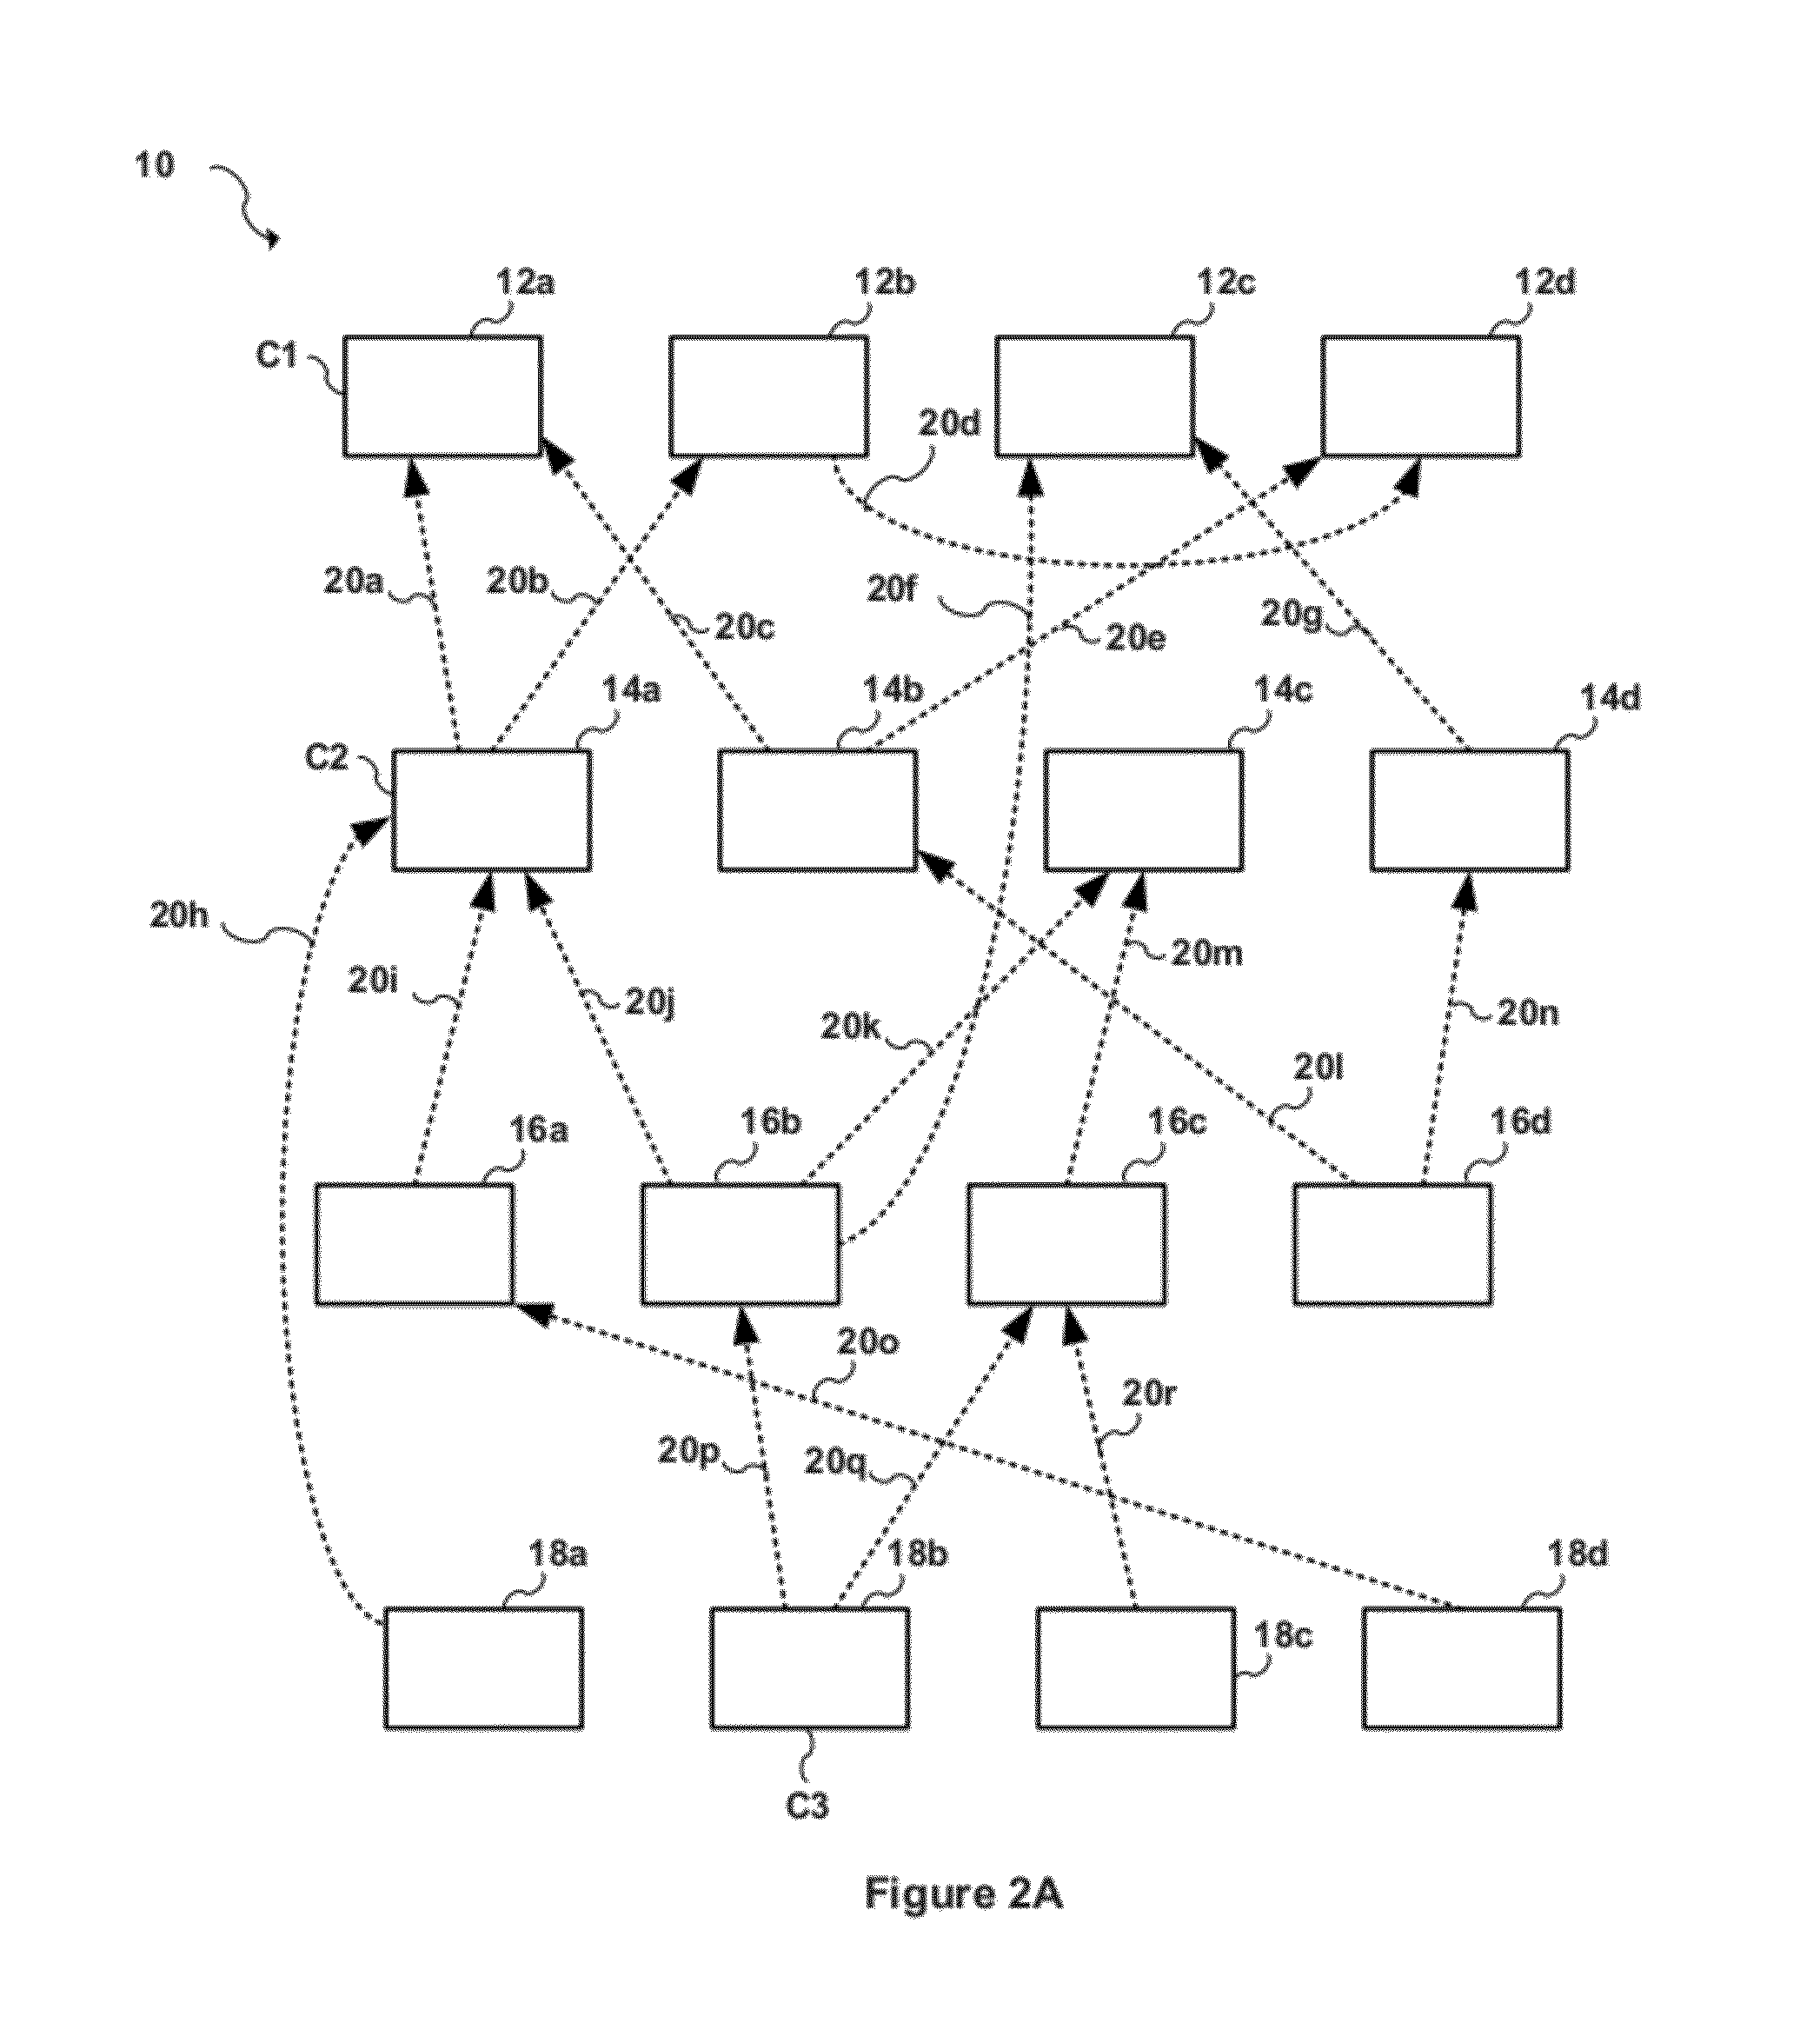 System, computer program and method for implementing and managing a value chain network